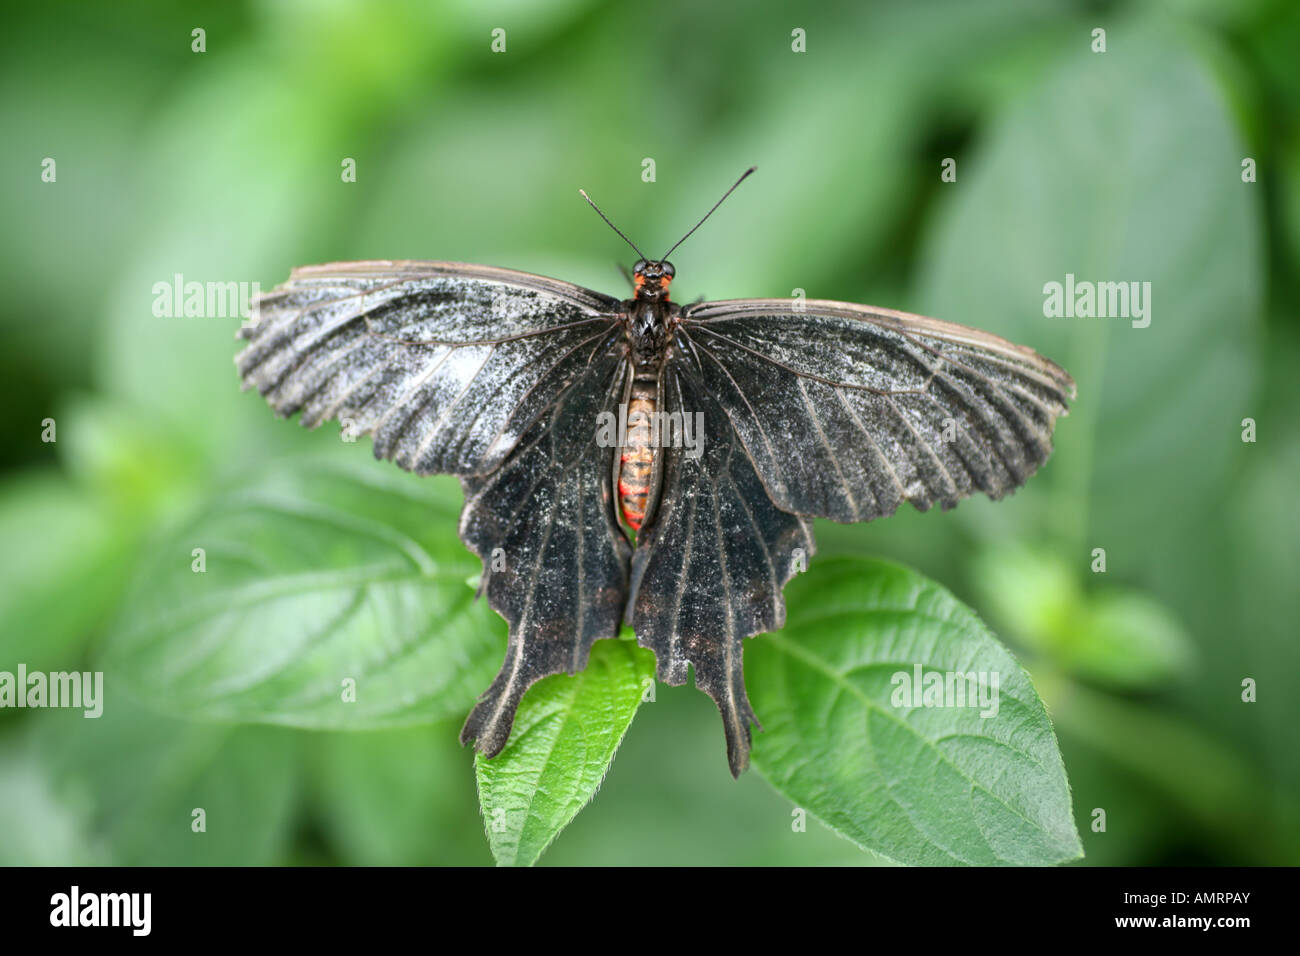 Crow Swallowtail butterfly Stock Photo